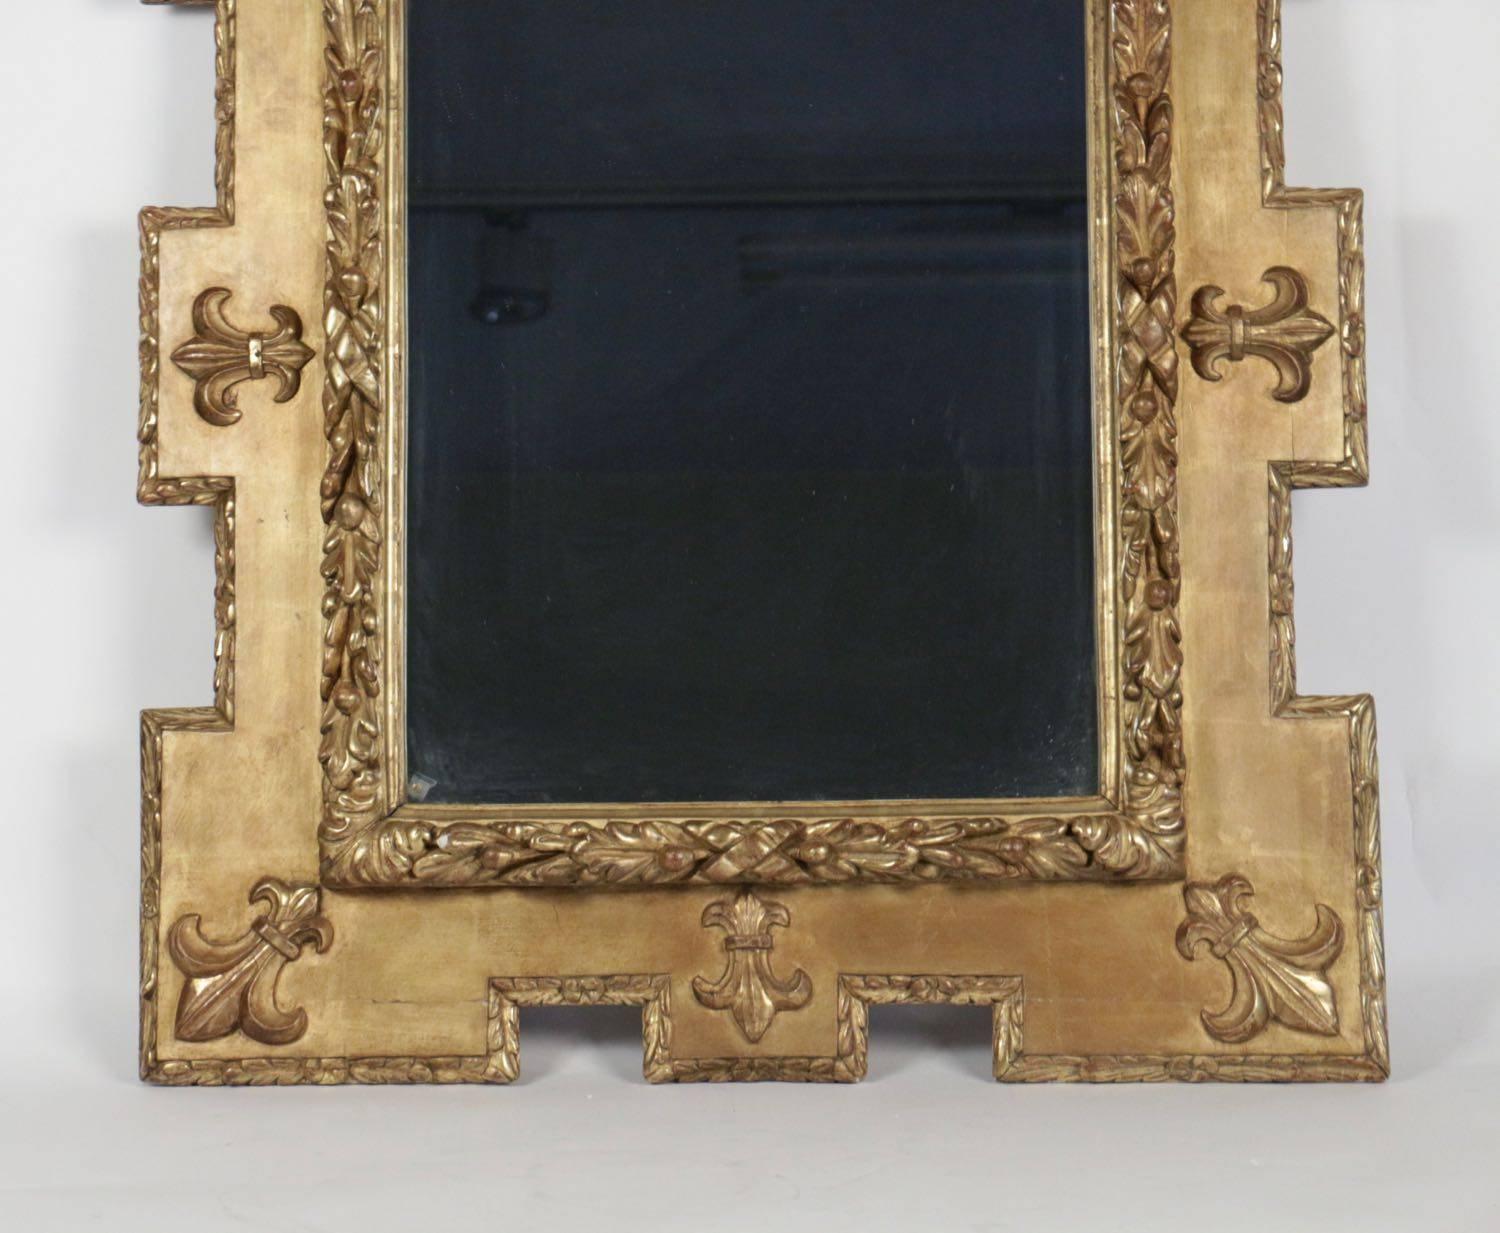 Louis XIV Very Pretty Gold Giltwood and Gesso Mirror with the Fleur De Lys Design